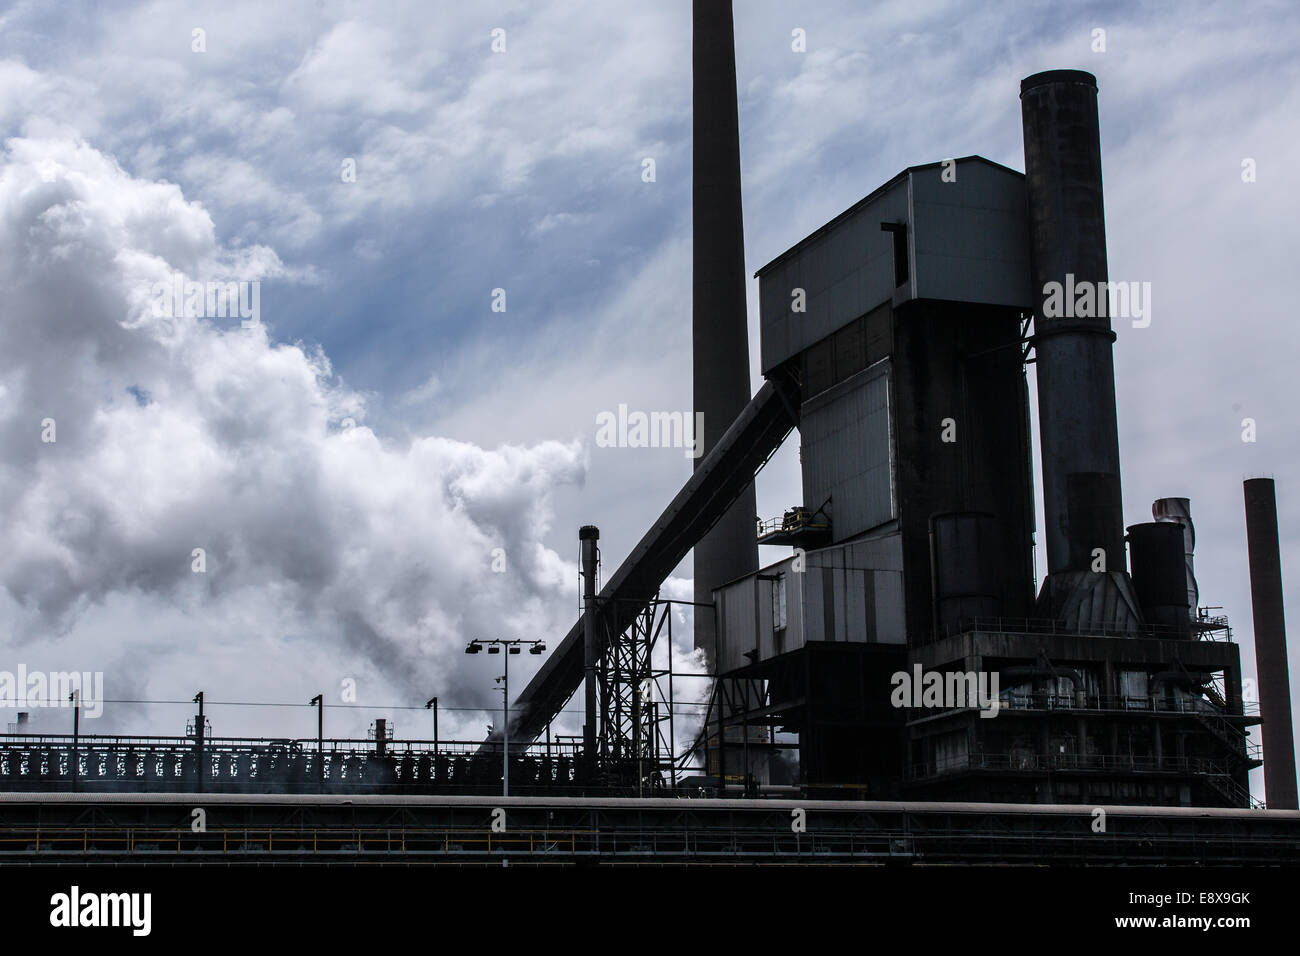 A steel mill in Australia emitting a plume of smoke or steam Stock Photo